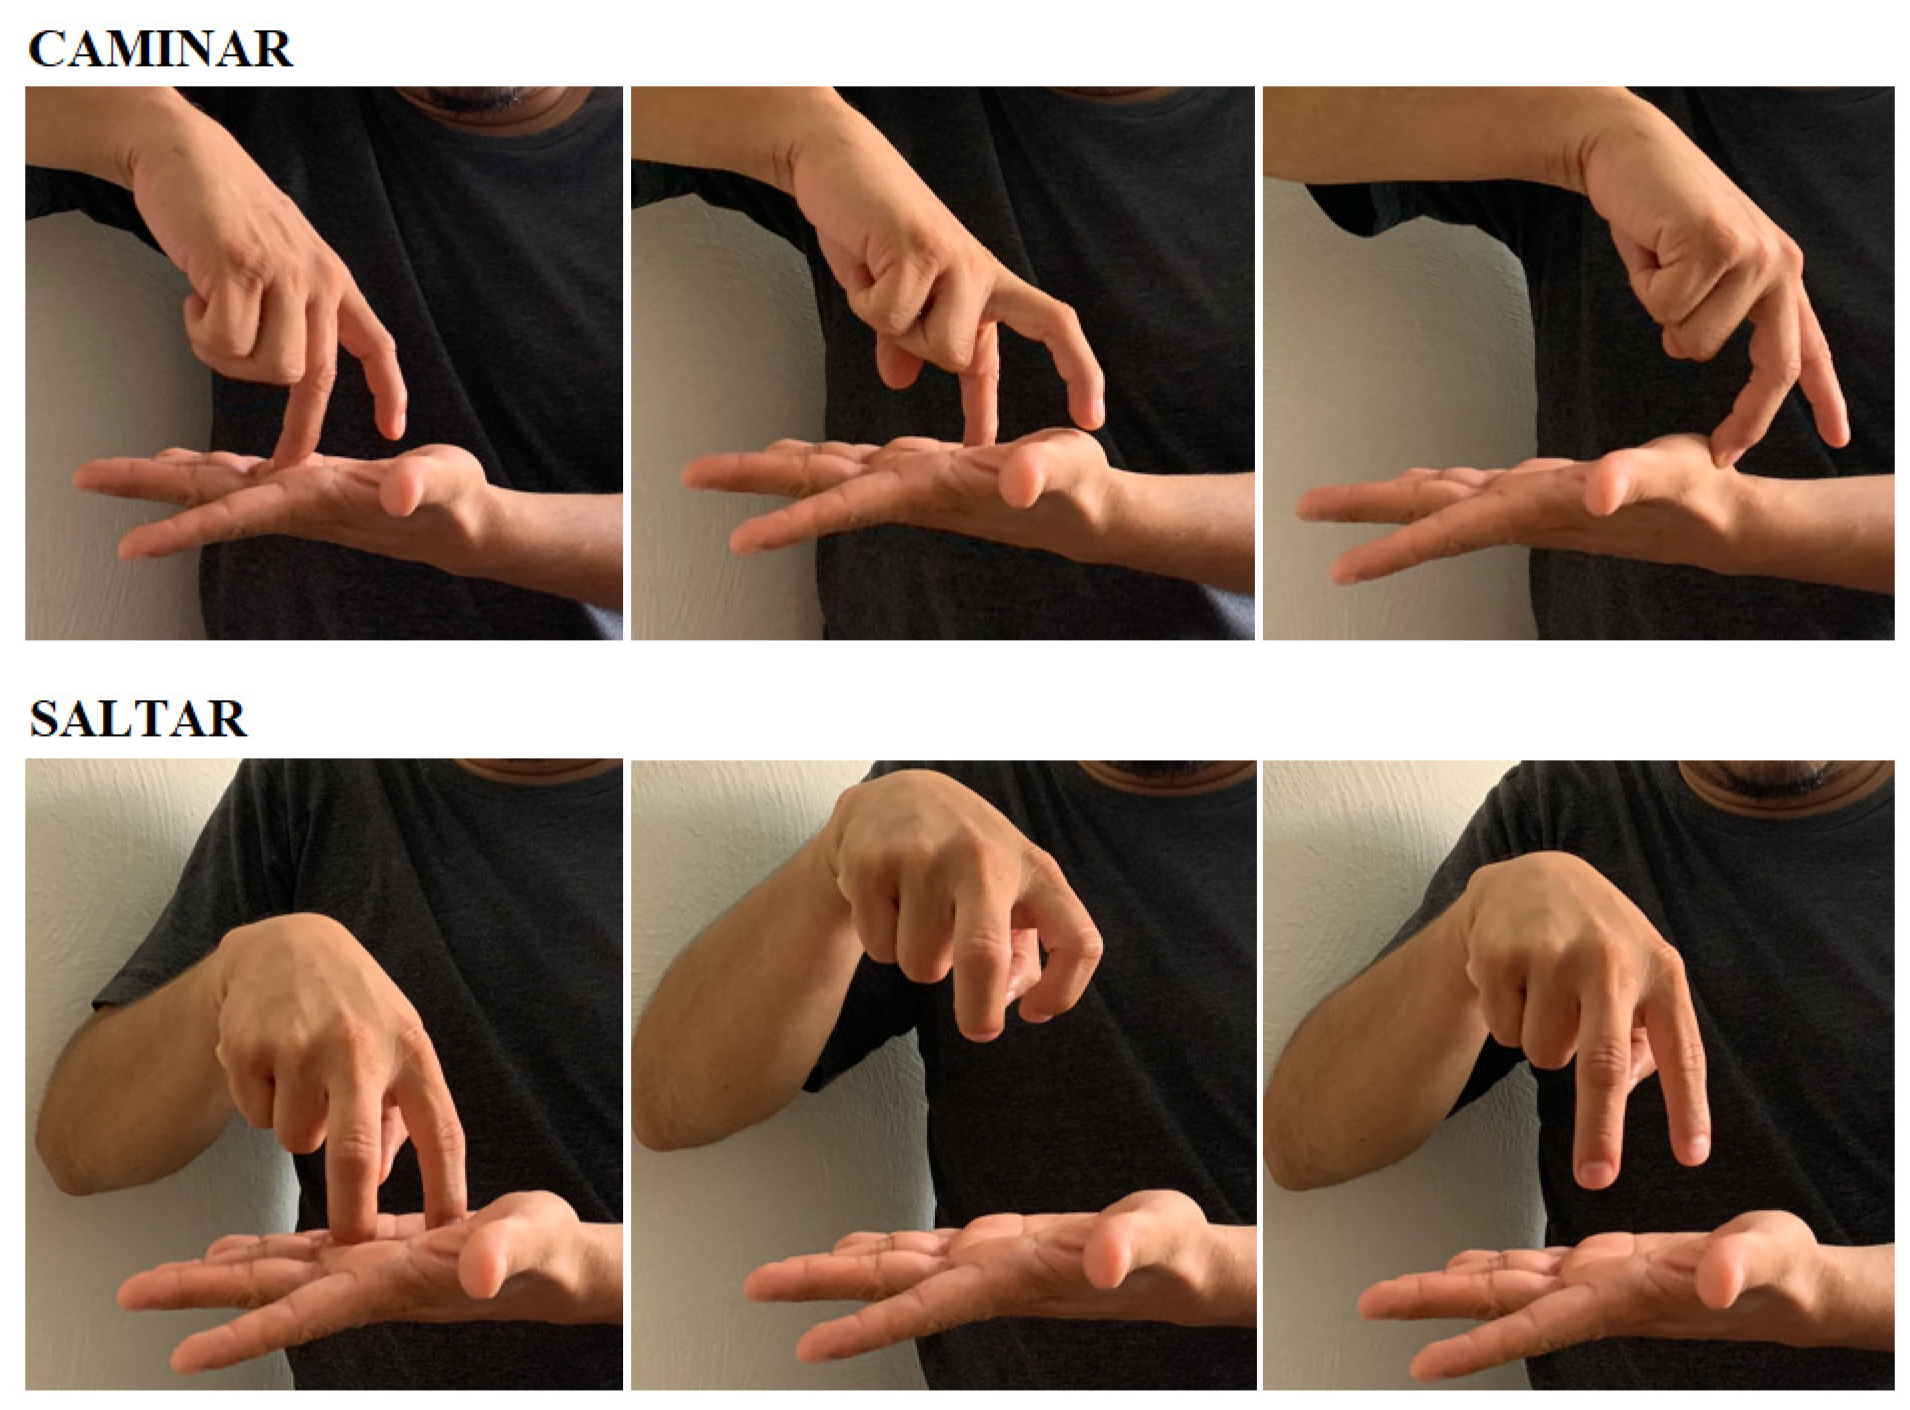 MTI Free Full-Text Exploring a Novel Mexican Sign Language Lexicon Video Dataset